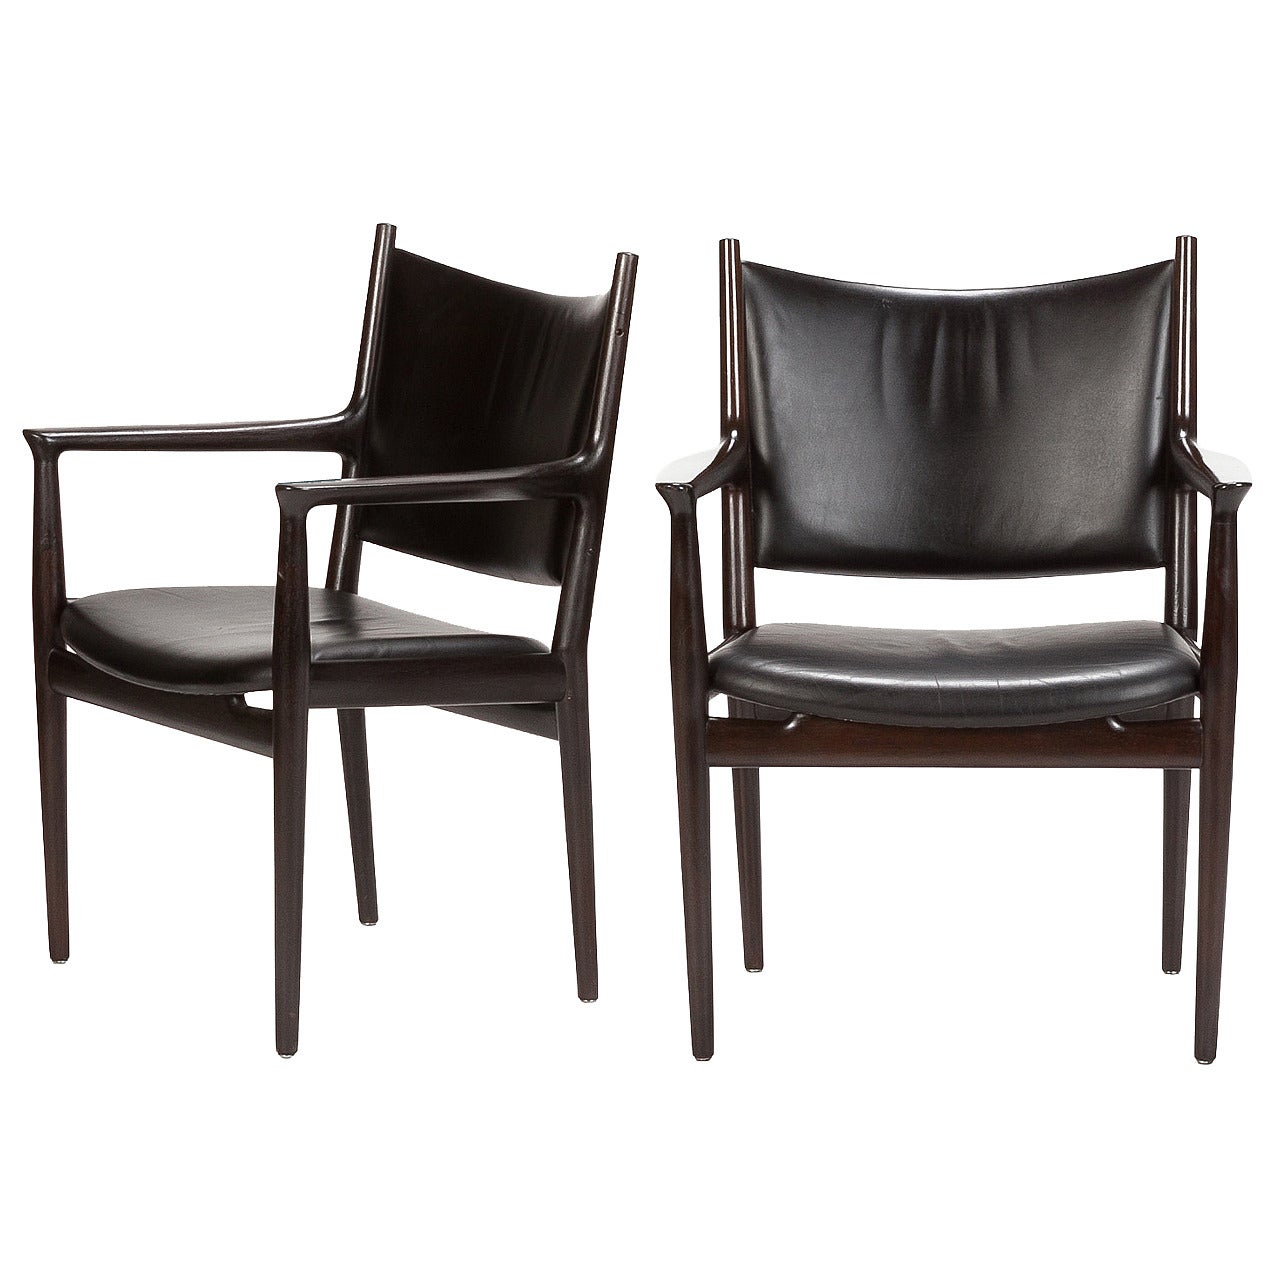 Pair of Conference Chairs JH-713 by Hans Wegner